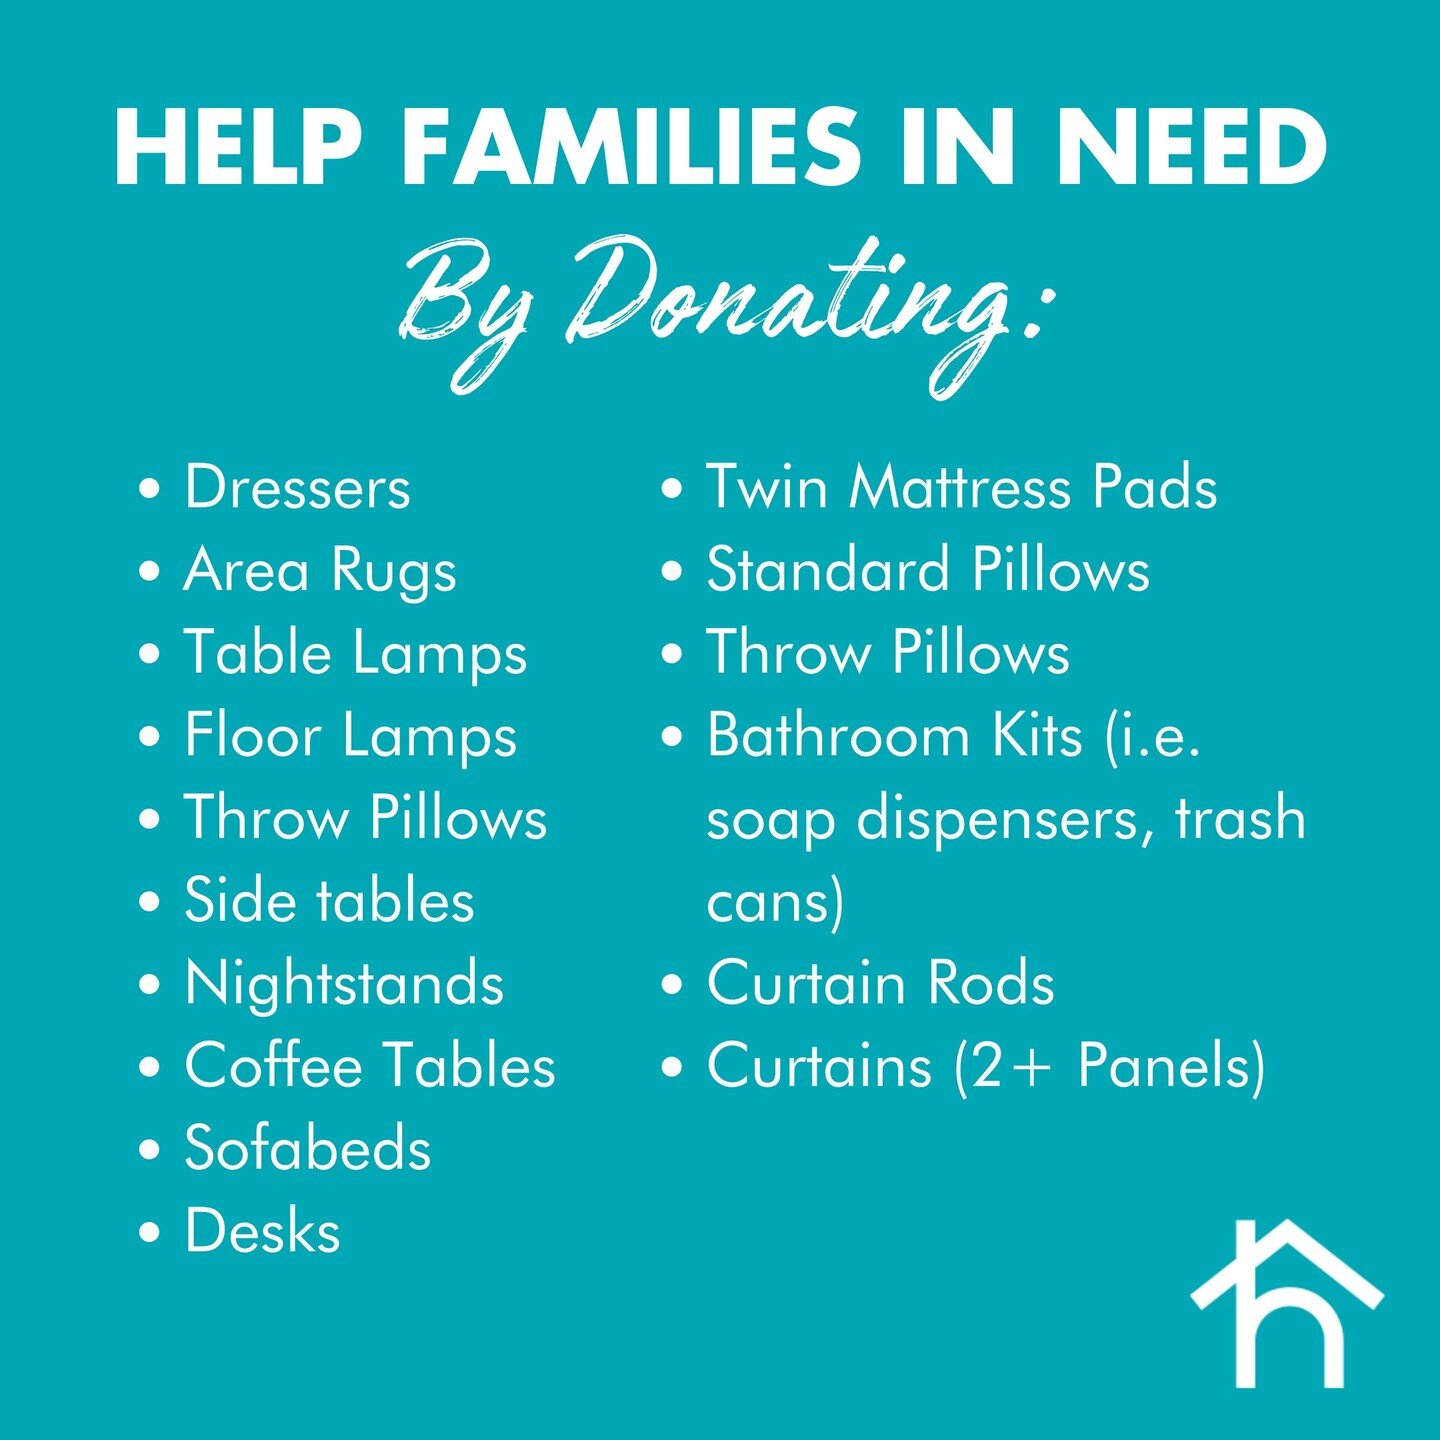 🤍 Wishlist Wednesday 🤍

Help us serve families in need by donating your furniture and home goods to us! 

If you have items to donate, please submit photos to our website - link in bio
.
.
.
.
.
.
.
.
#humbledesign #sandiegodonations #sddonations #